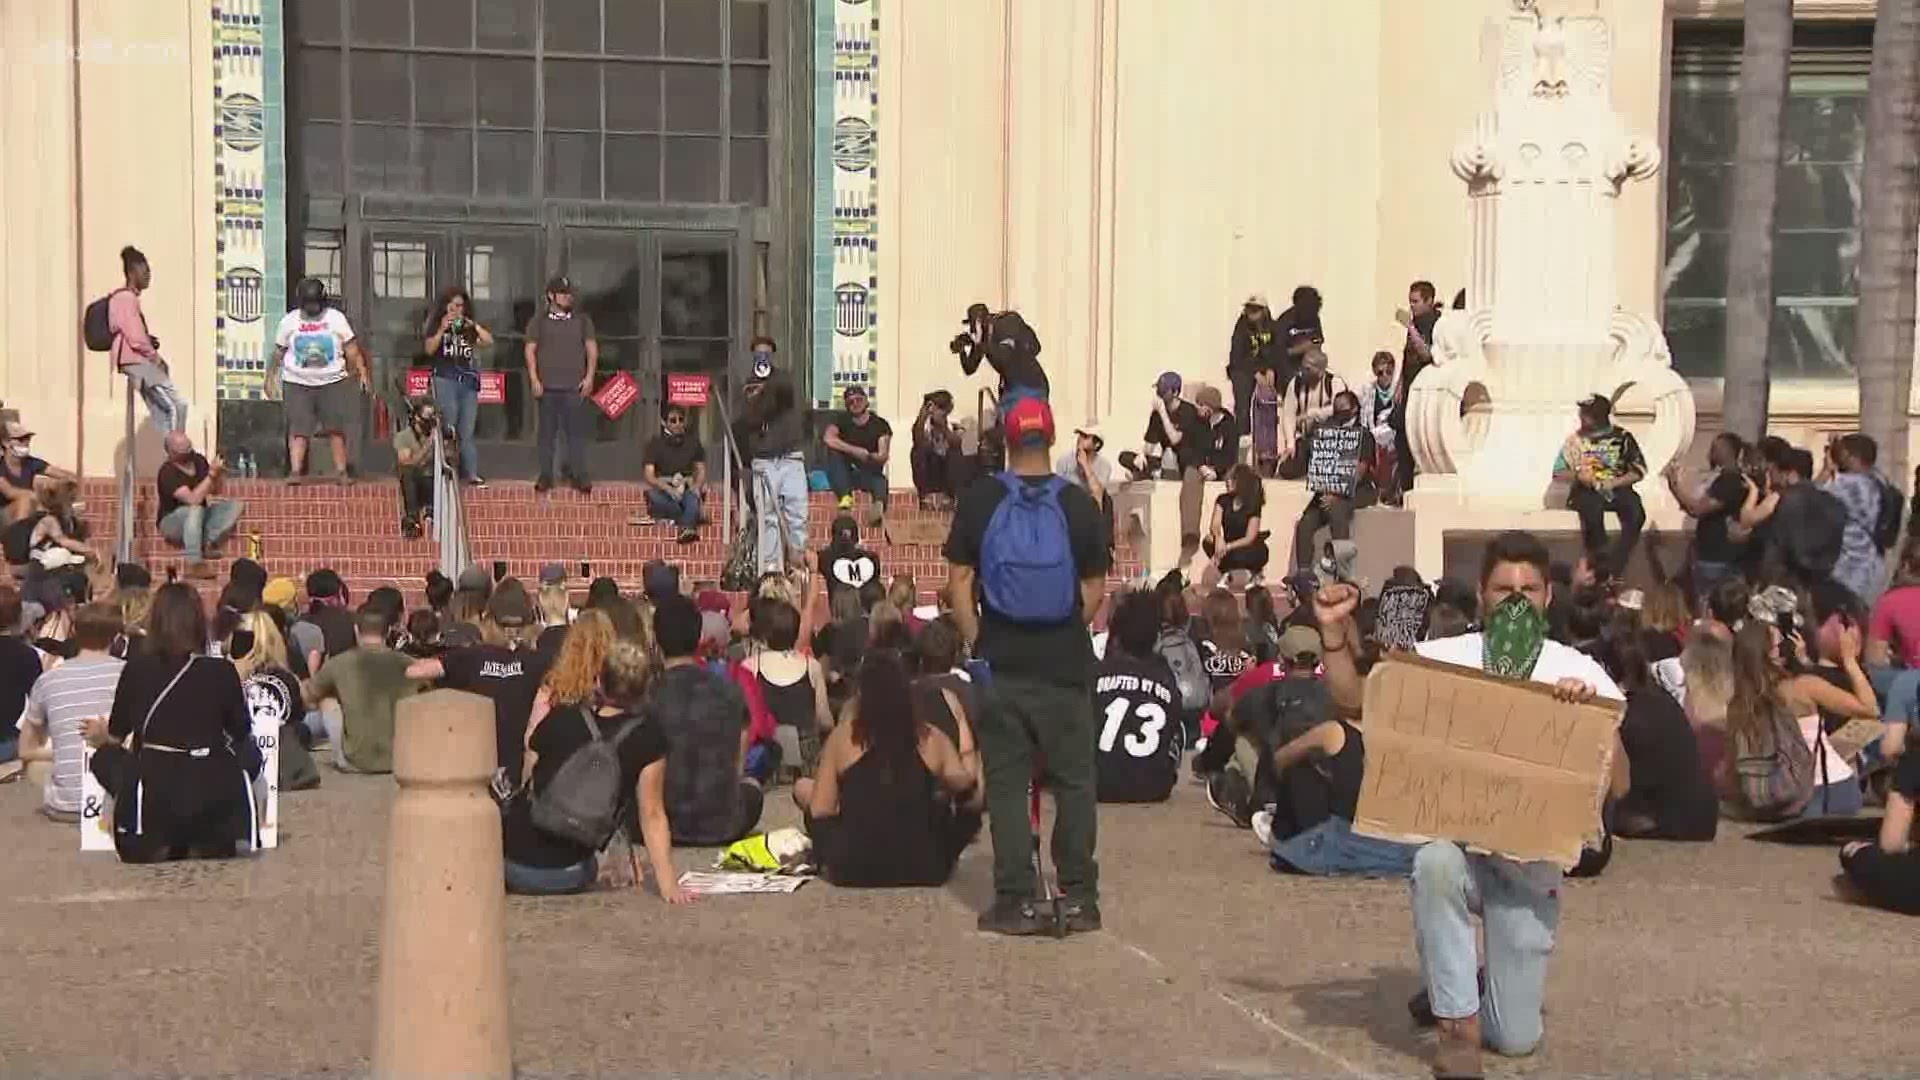 A group of hundreds, possibly over 1,000, were at the County Administration Building as of 5 p.m.